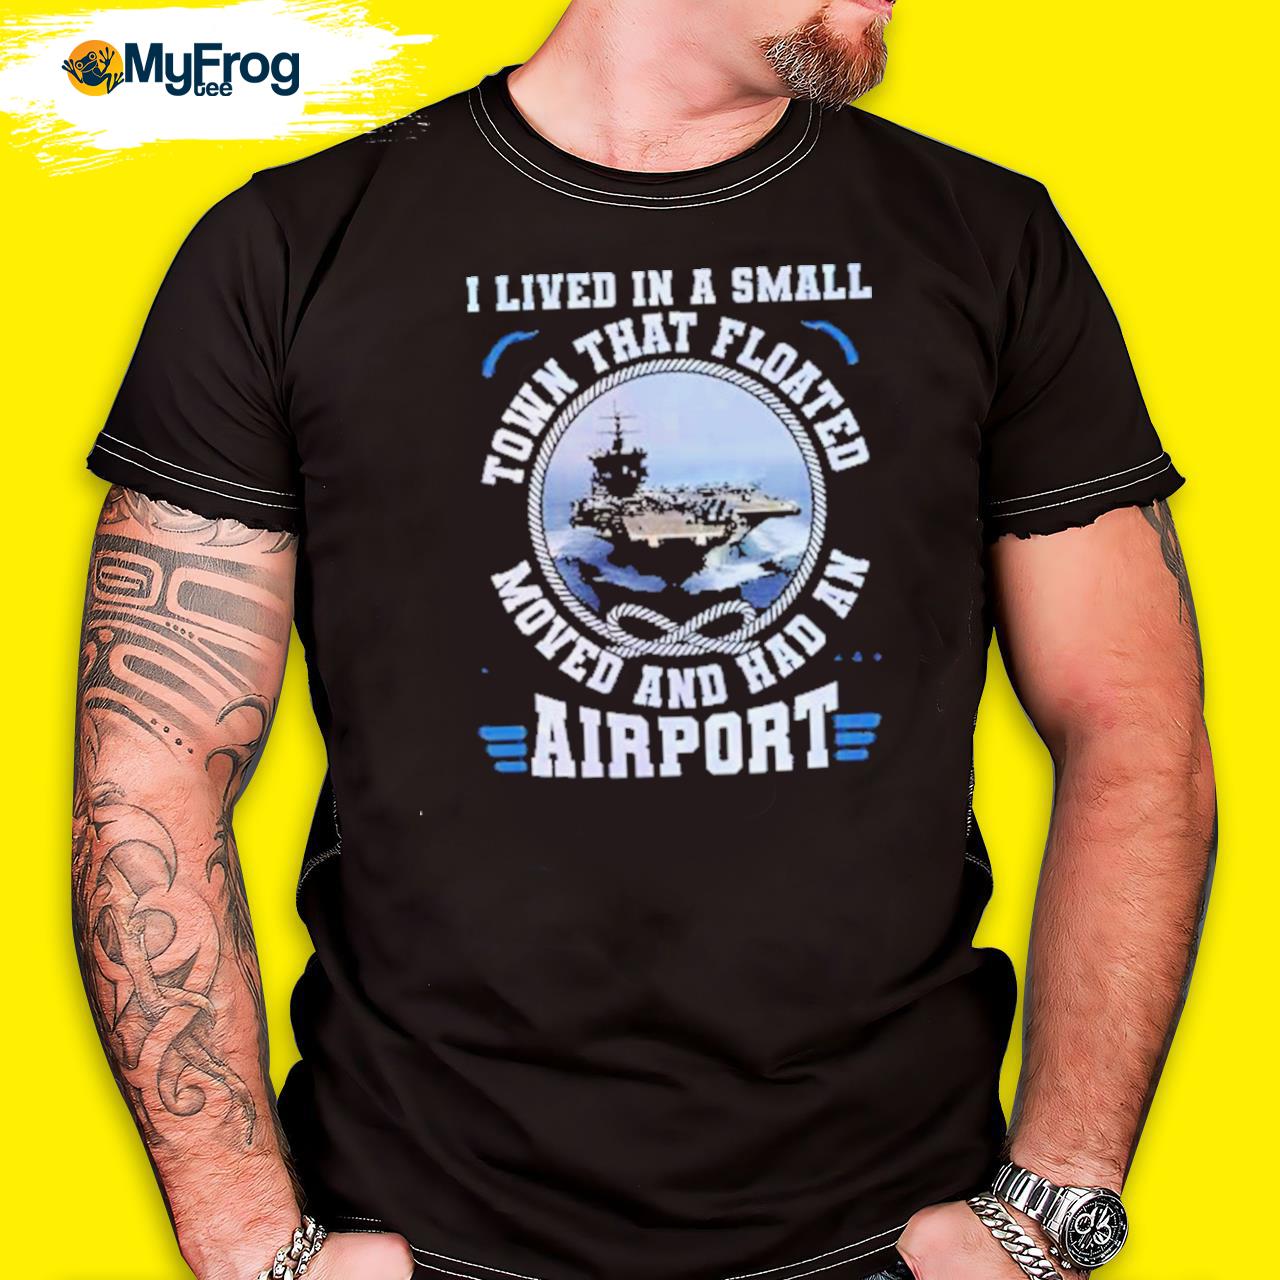 I lived in a small town that floated moved and had an airport shirt